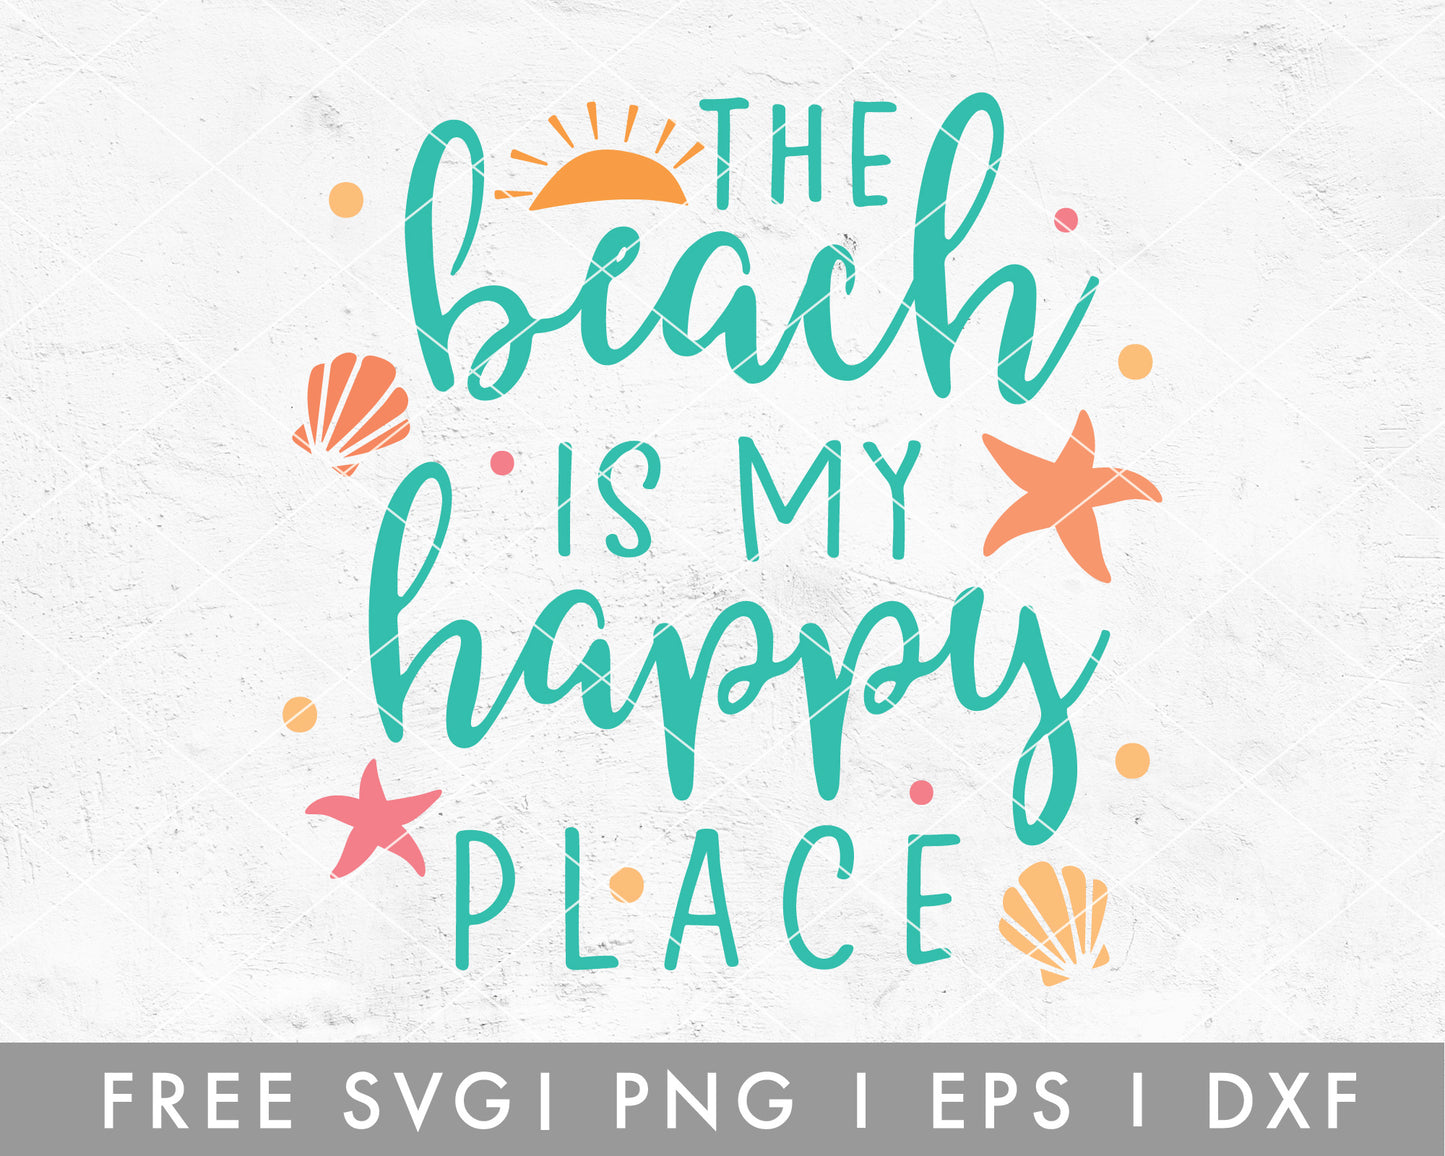 FREE Beach SVG | Beach Is My Happy Place SVG Cut File for Cricut, Cameo Silhouette | Free SVG Cut File